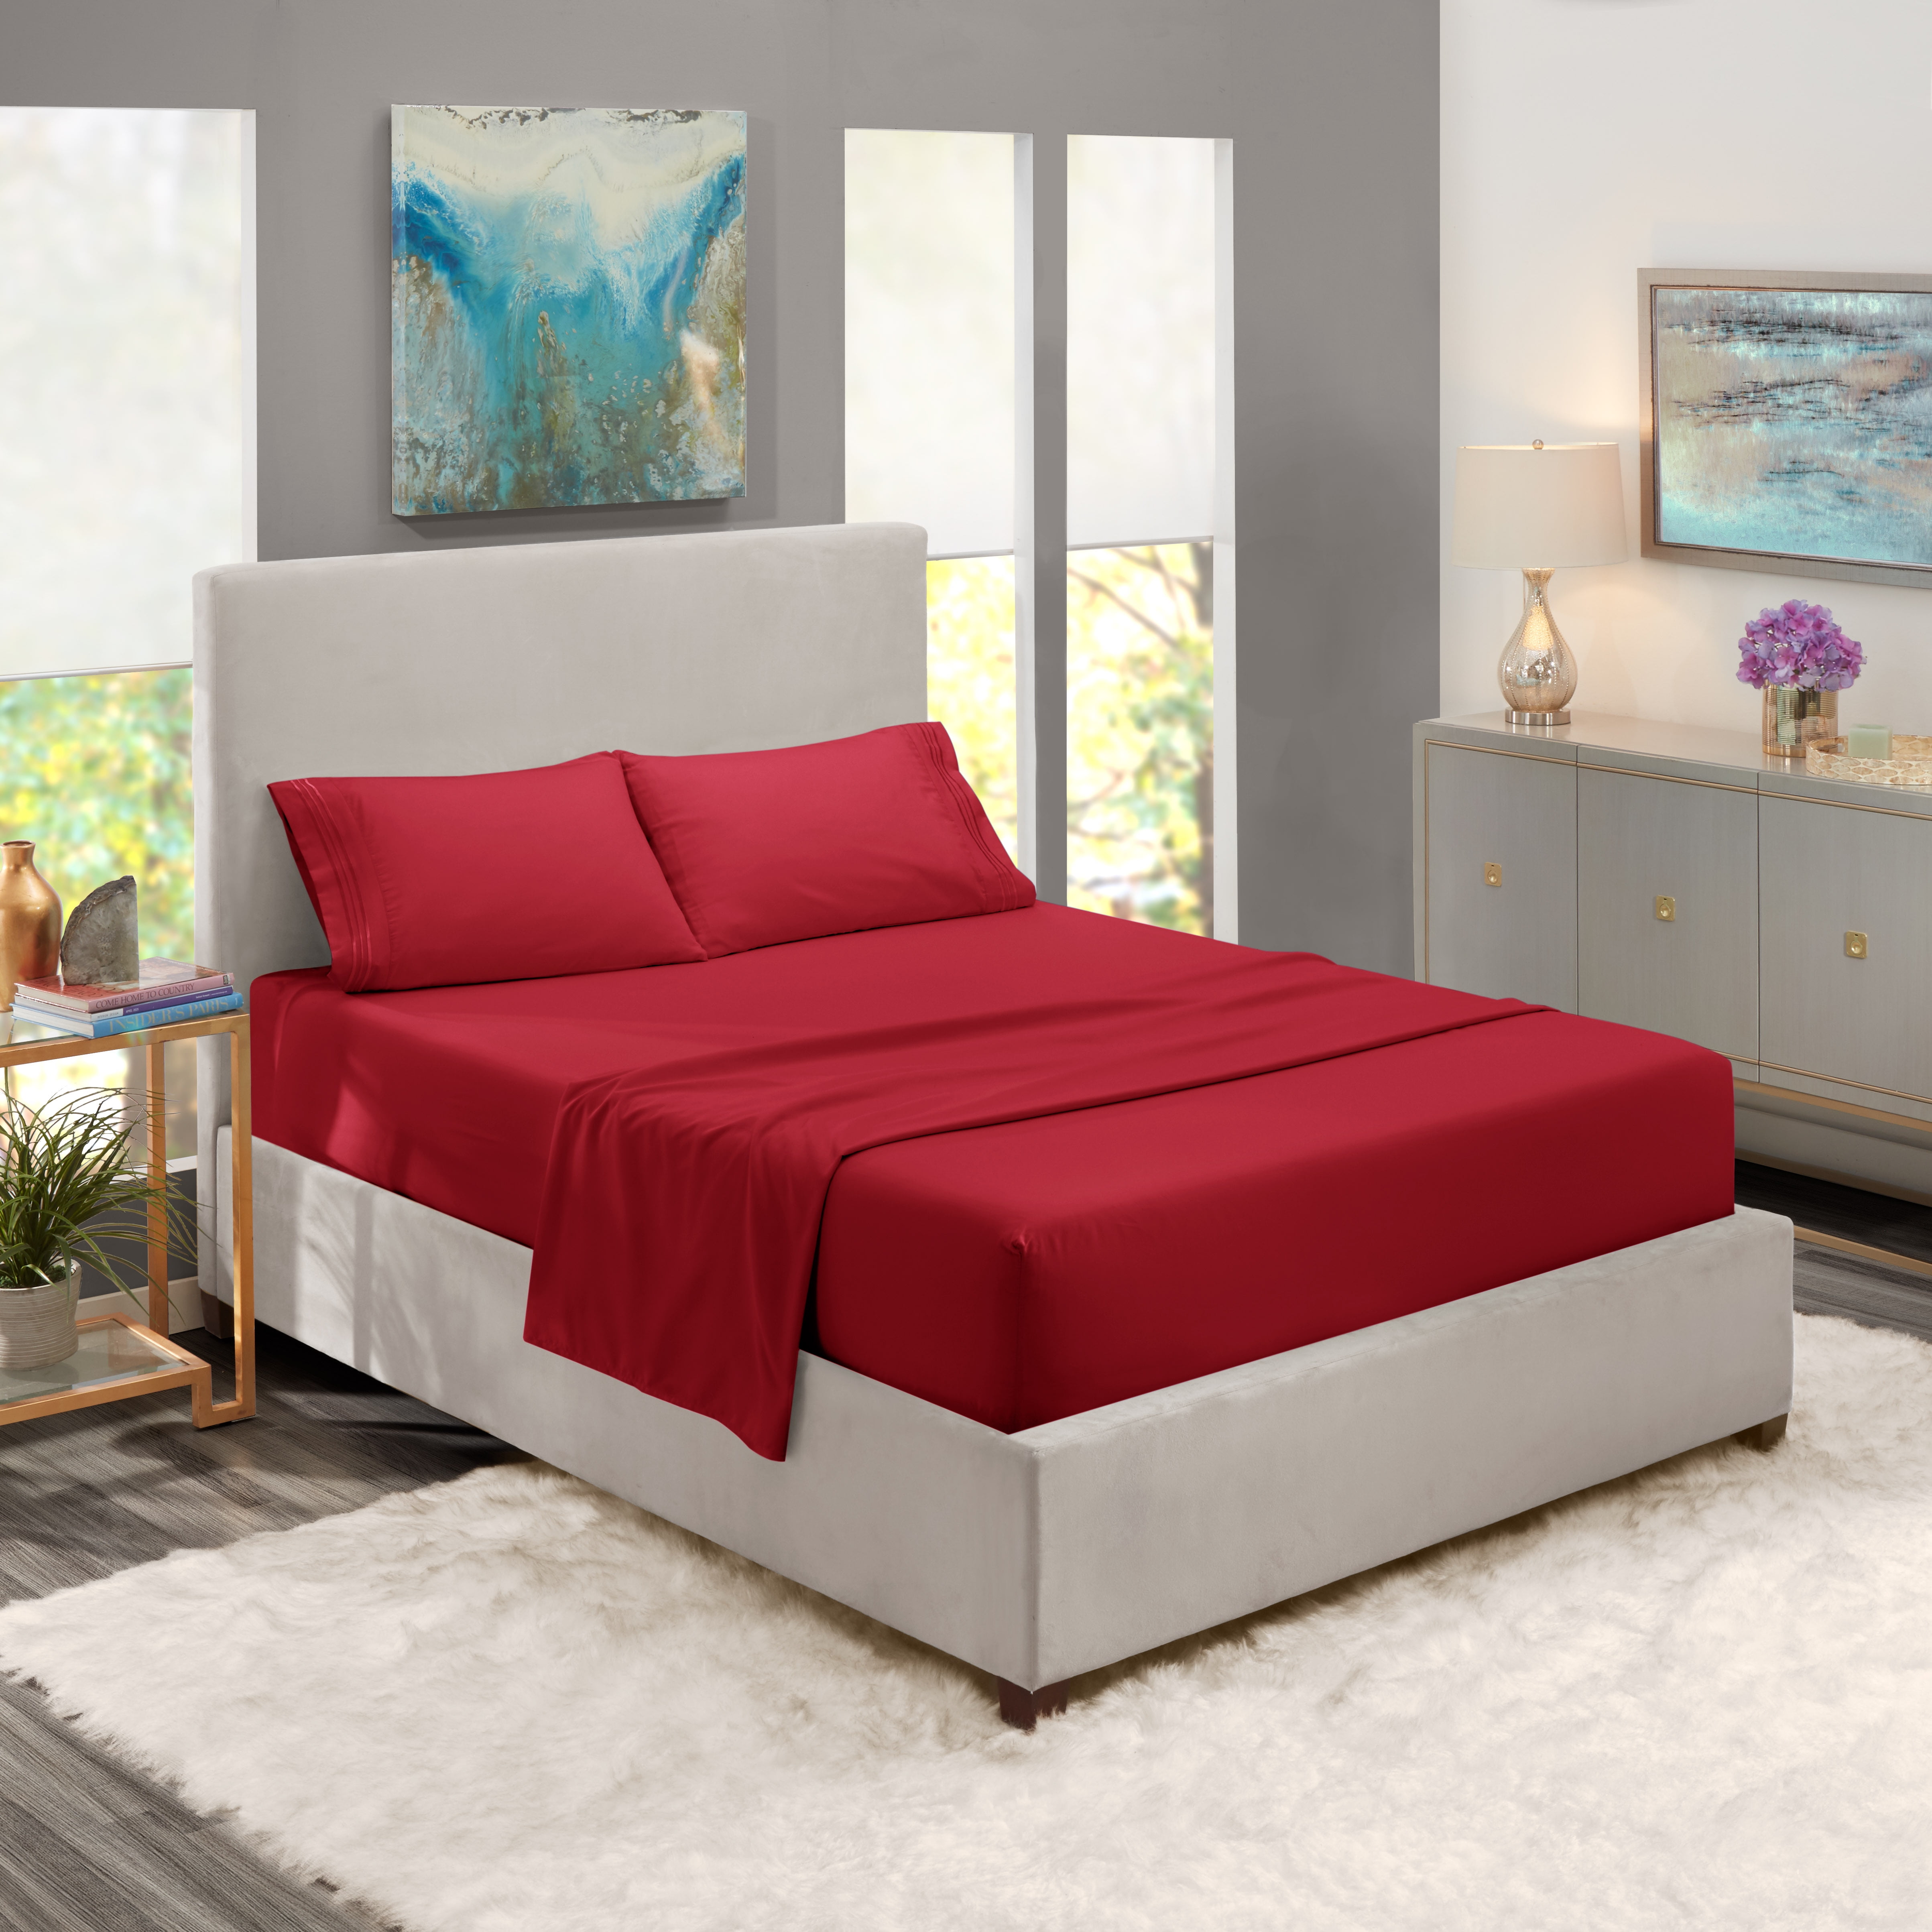 King Size Bed Sheets Set Burdy Red, King Size Bed Sheets Clearance